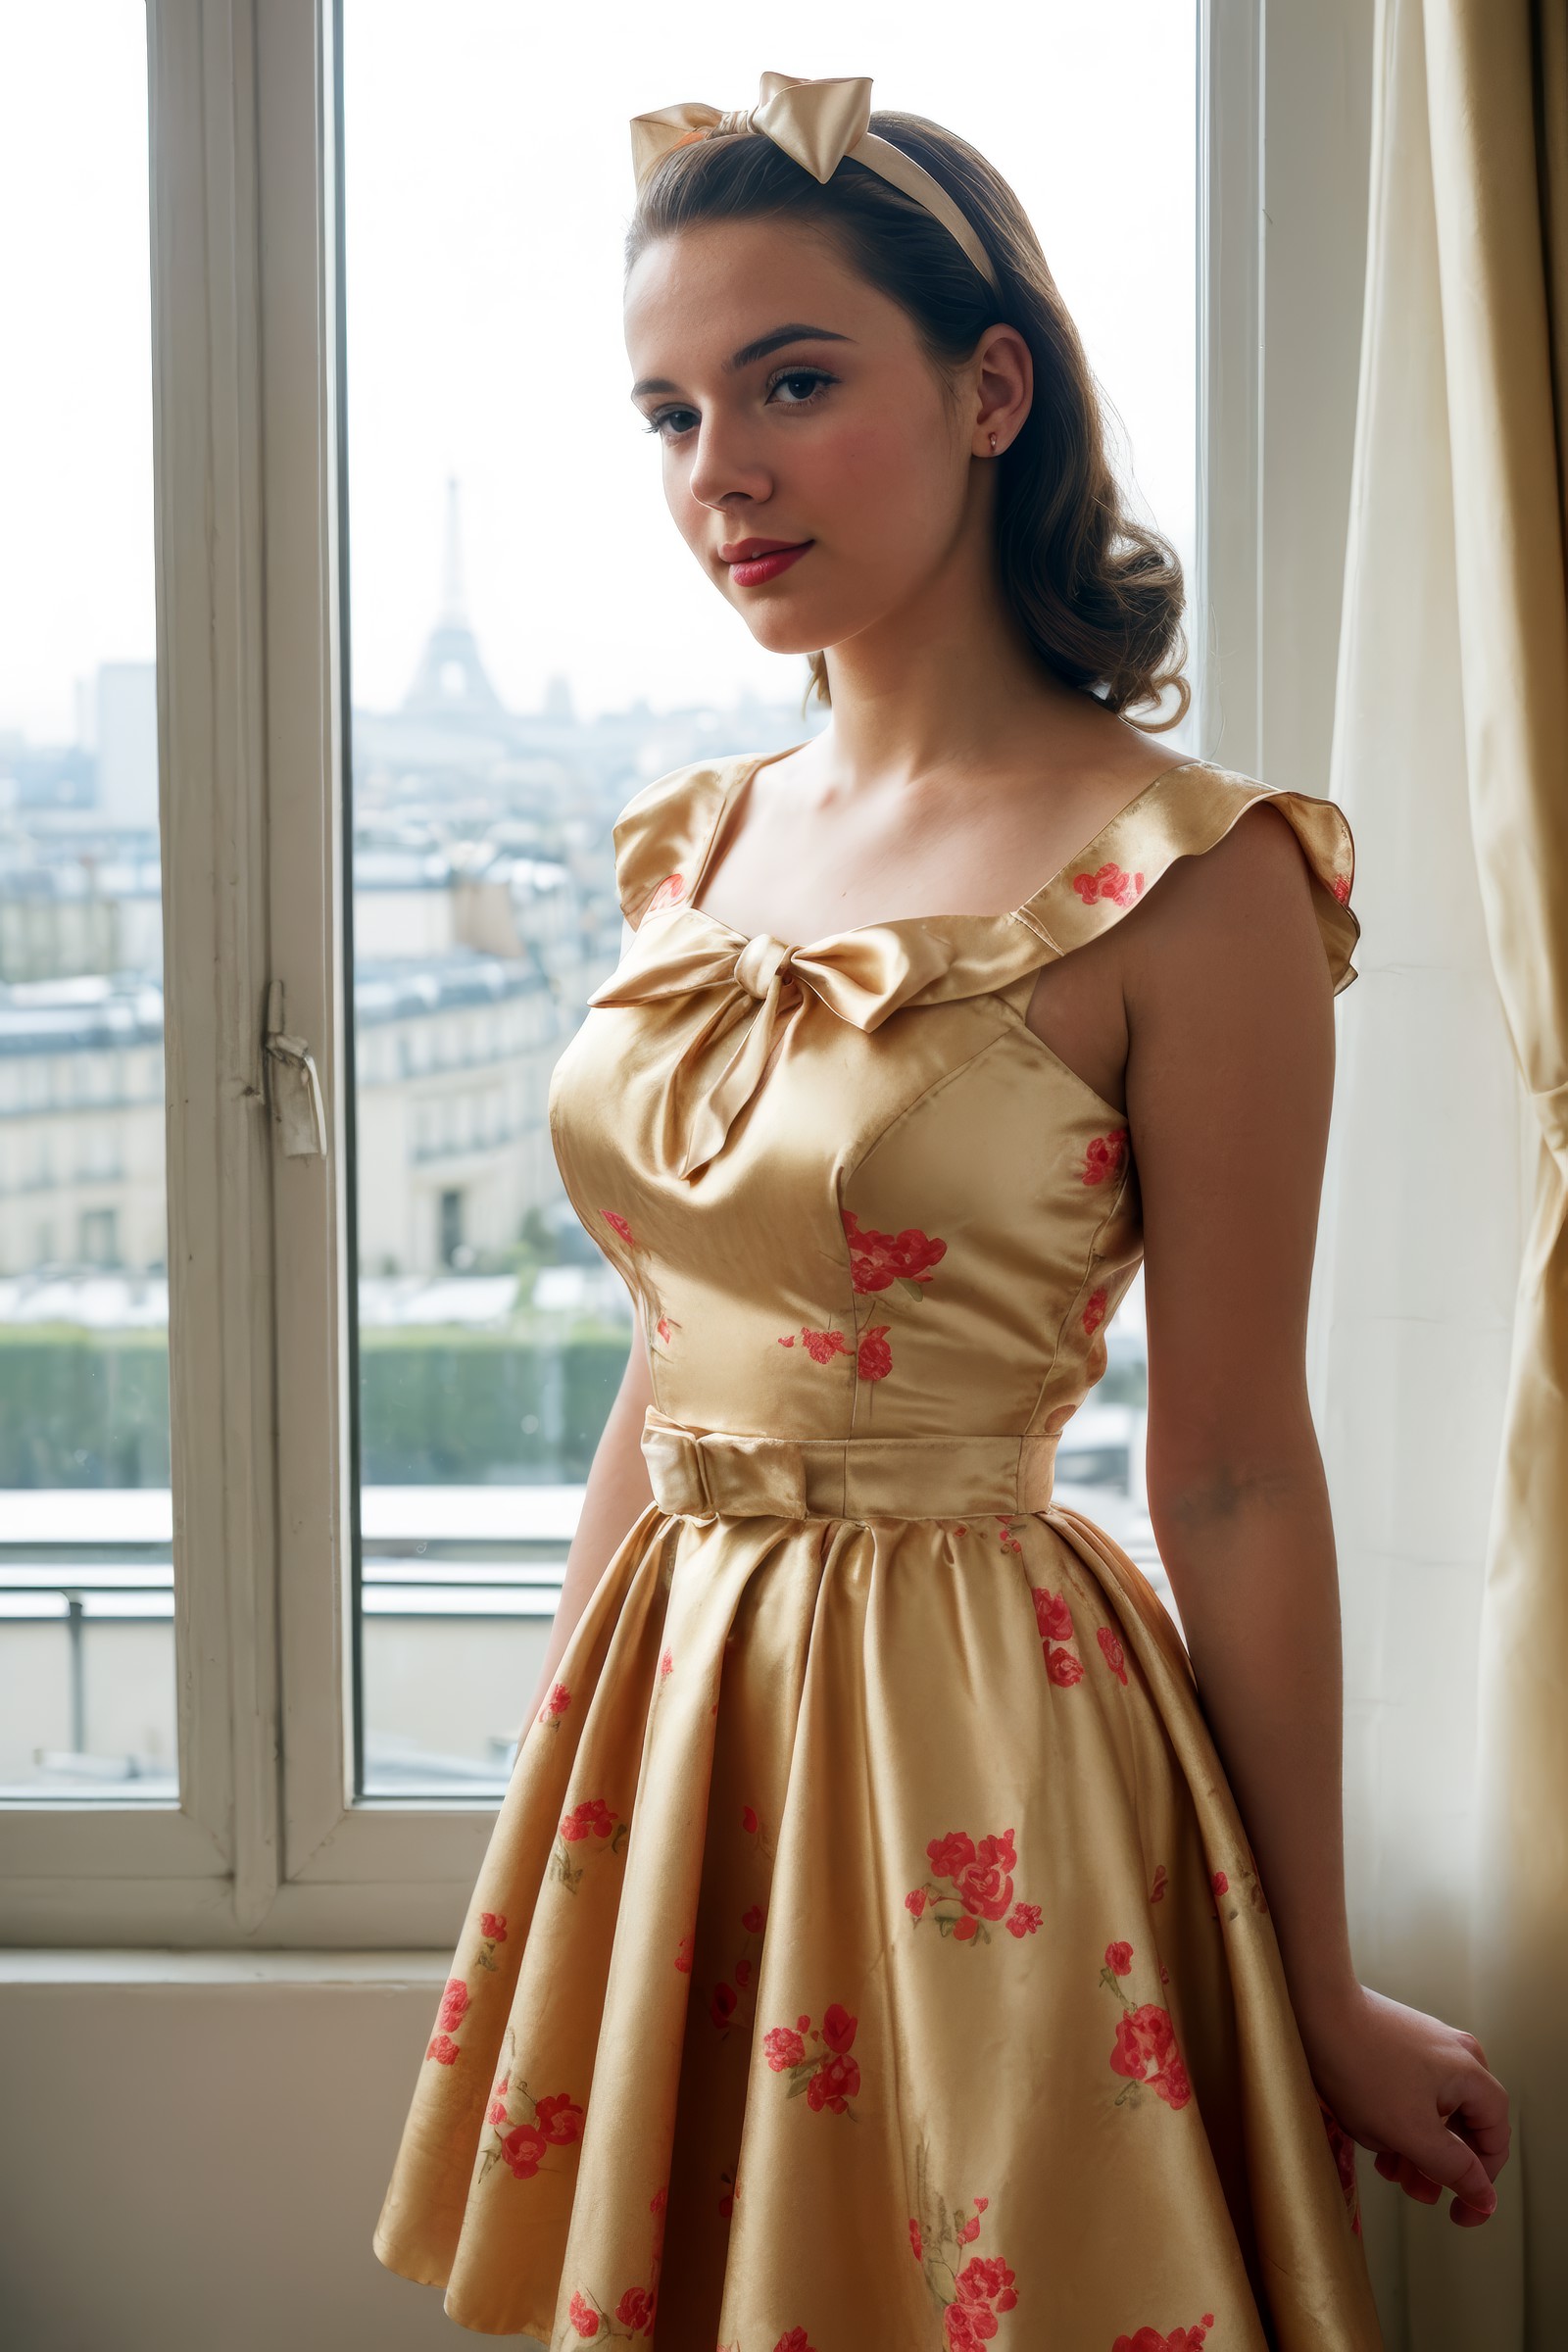 (1950s style:1.2), a beautiful young woman, satin dress with flowers print and (ribbon in her hair:1.1), standing in front...